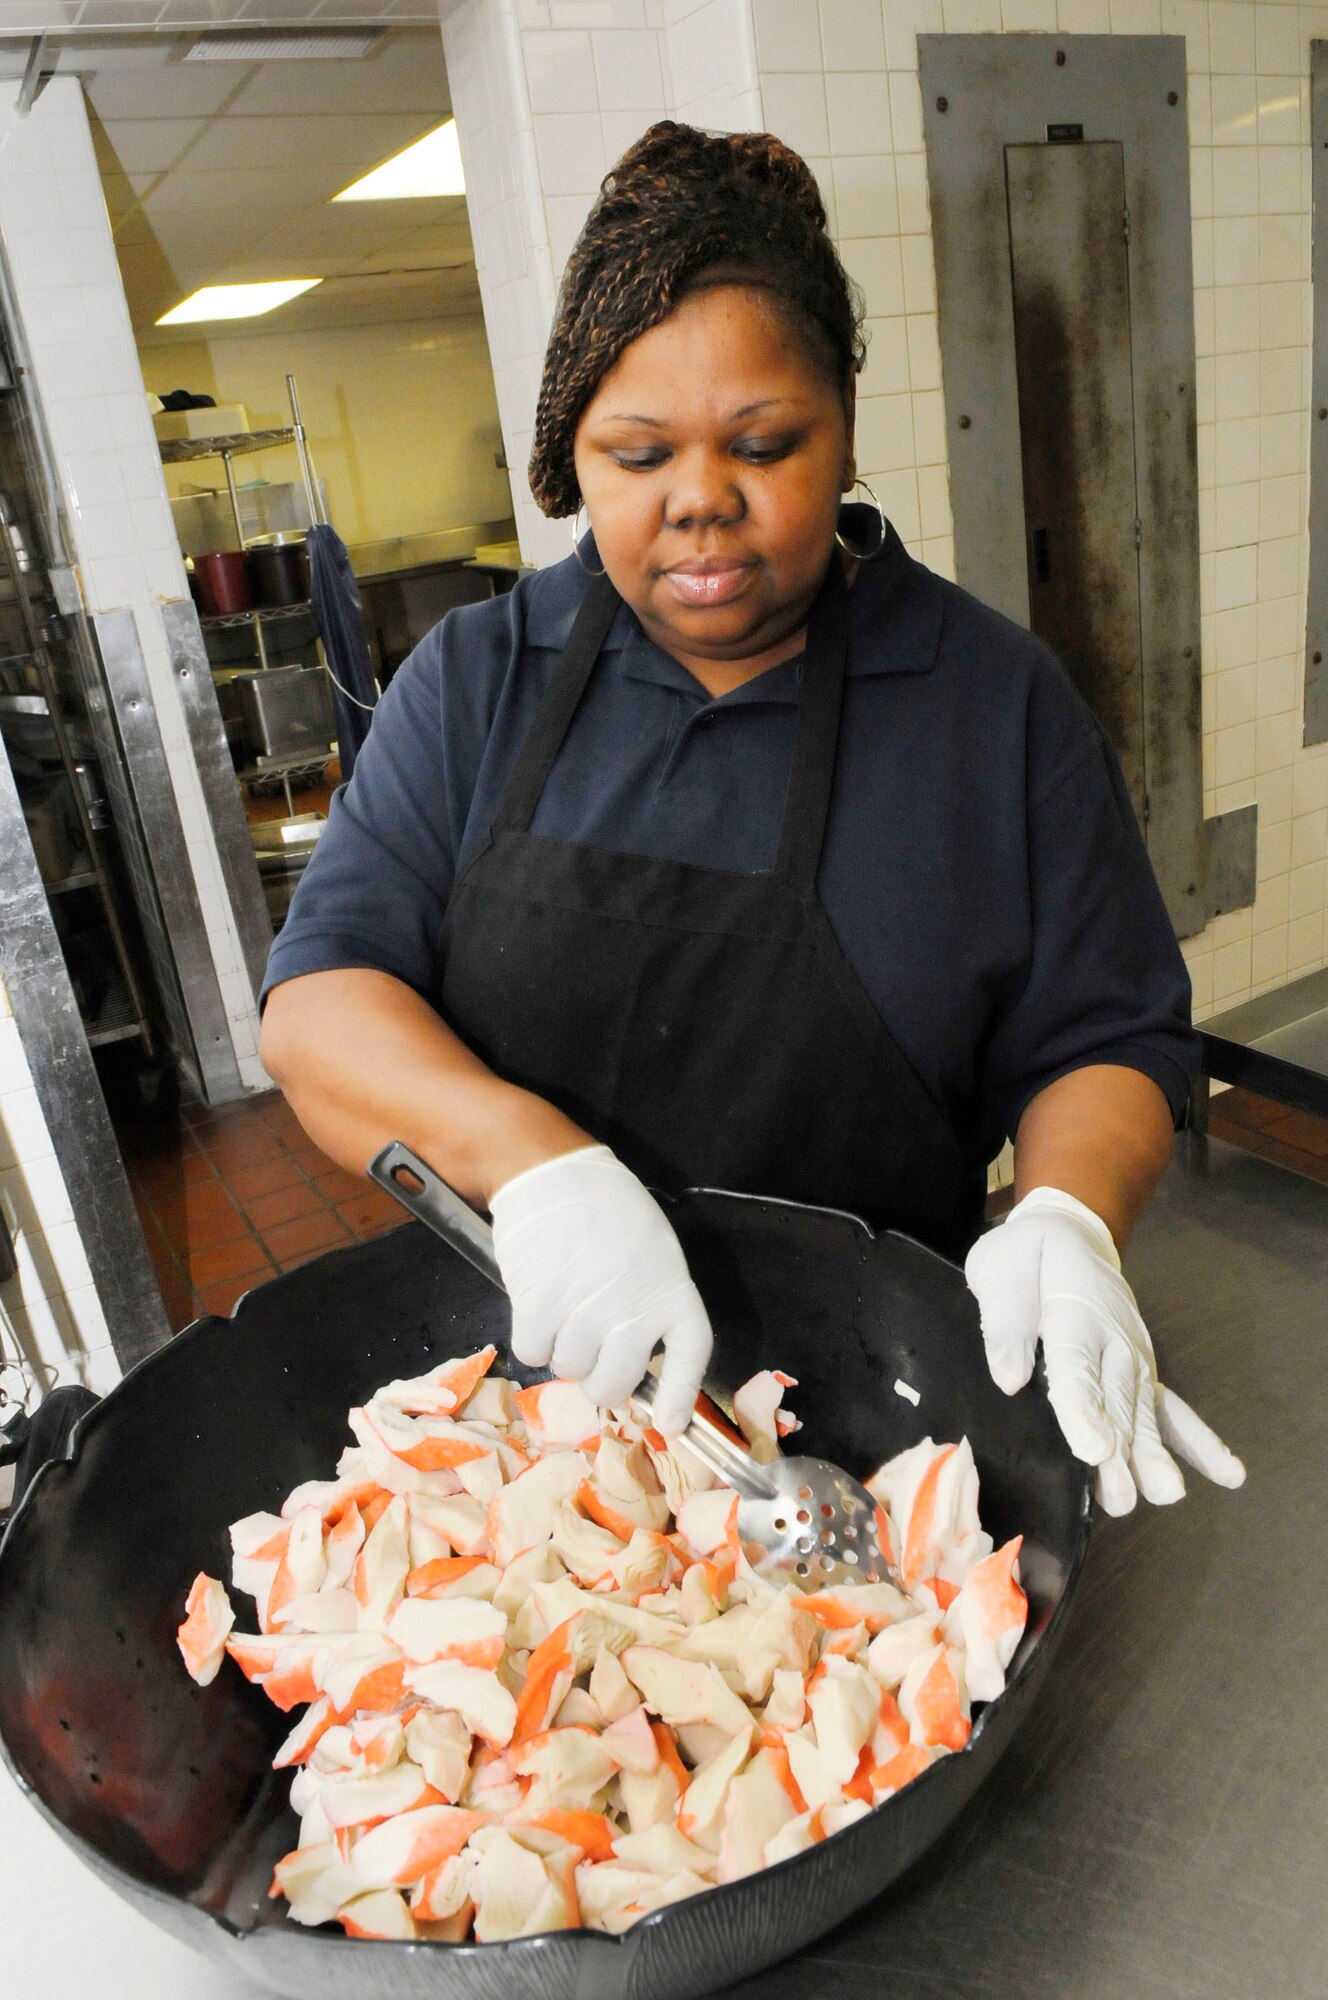 Lisa Paige, Horizons cook, prepares crab salad for lunch. (U. S. Air Force photo by Sue Sapp)